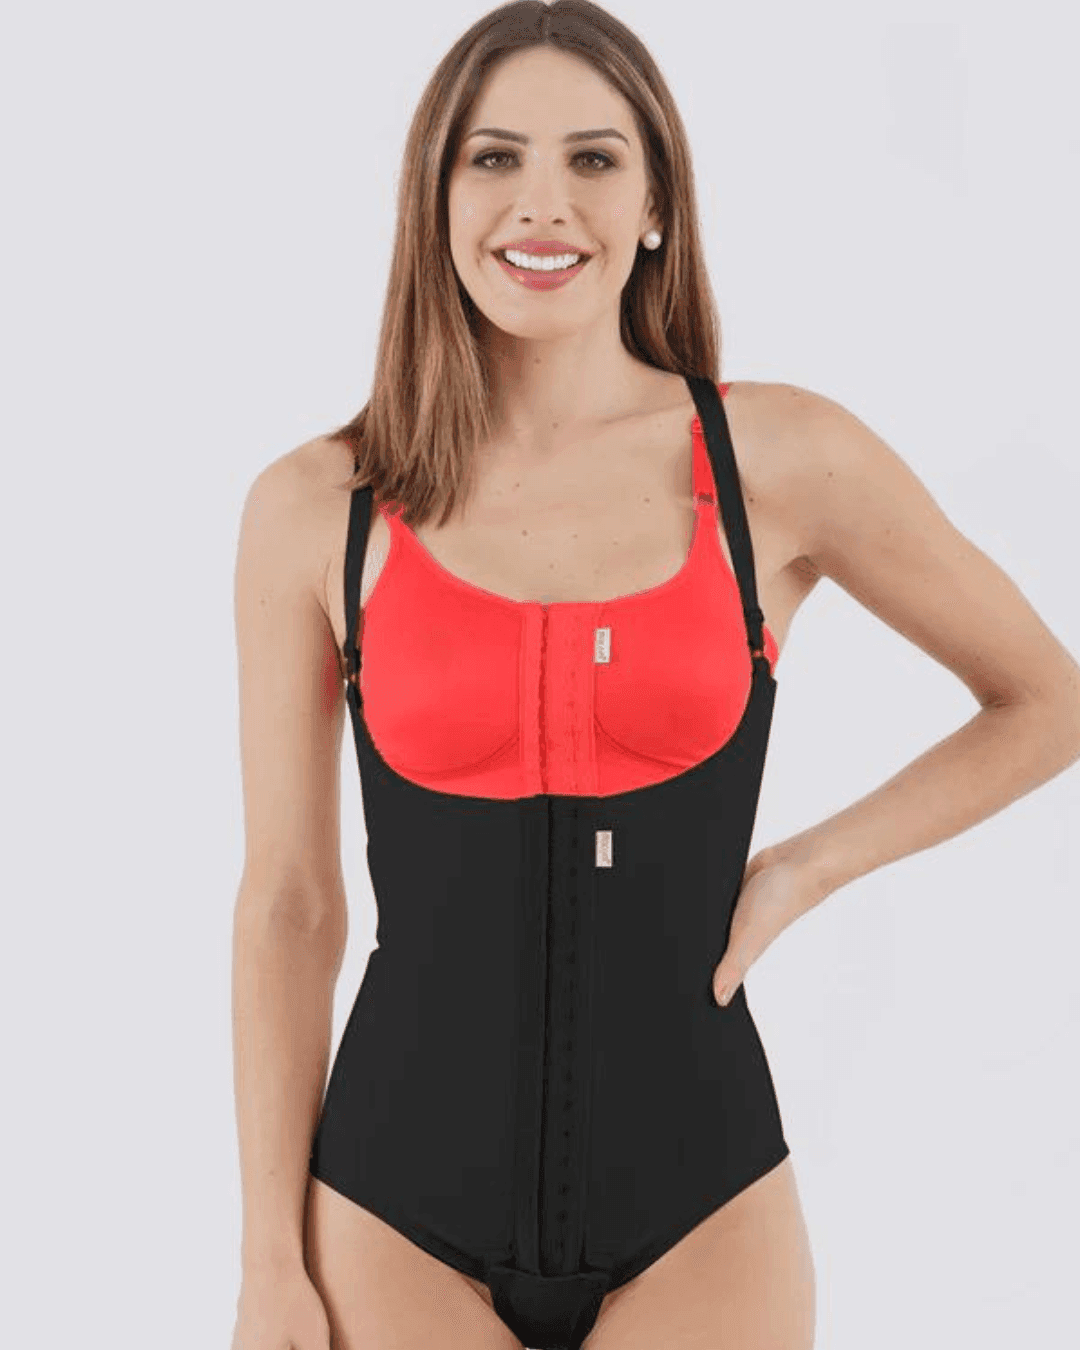 Image of lady wearing the macom high back girdle in black. Suitable for abdominal surgeries including caesarean delivery and liposuction procedures